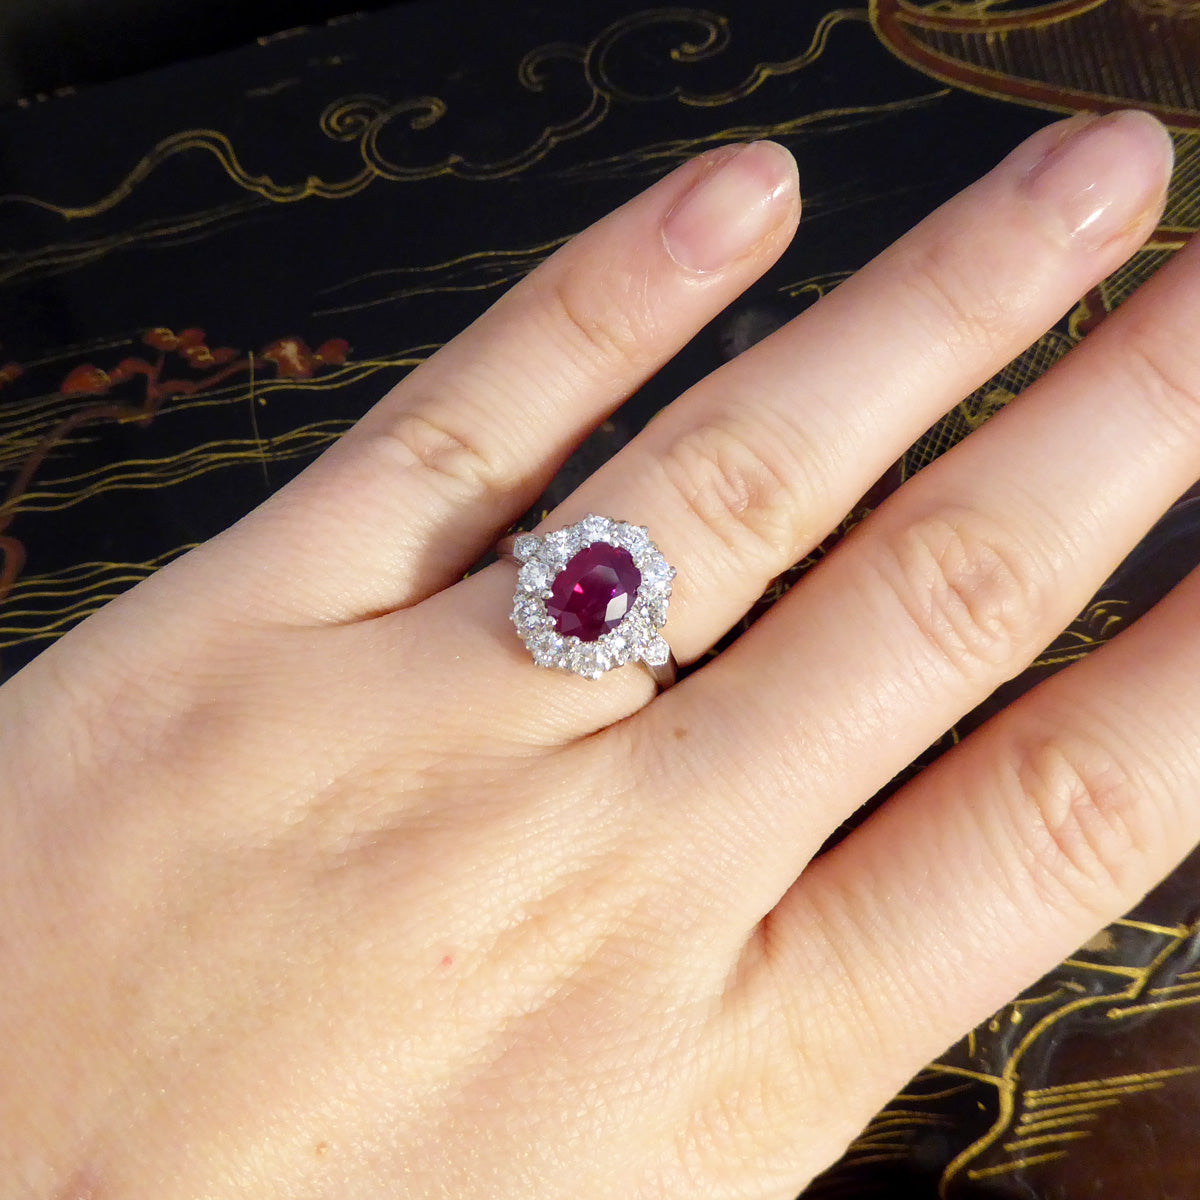 Contemporary 1.28ct Ruby and 0.95ct Diamond Cluster Ring in Platinum